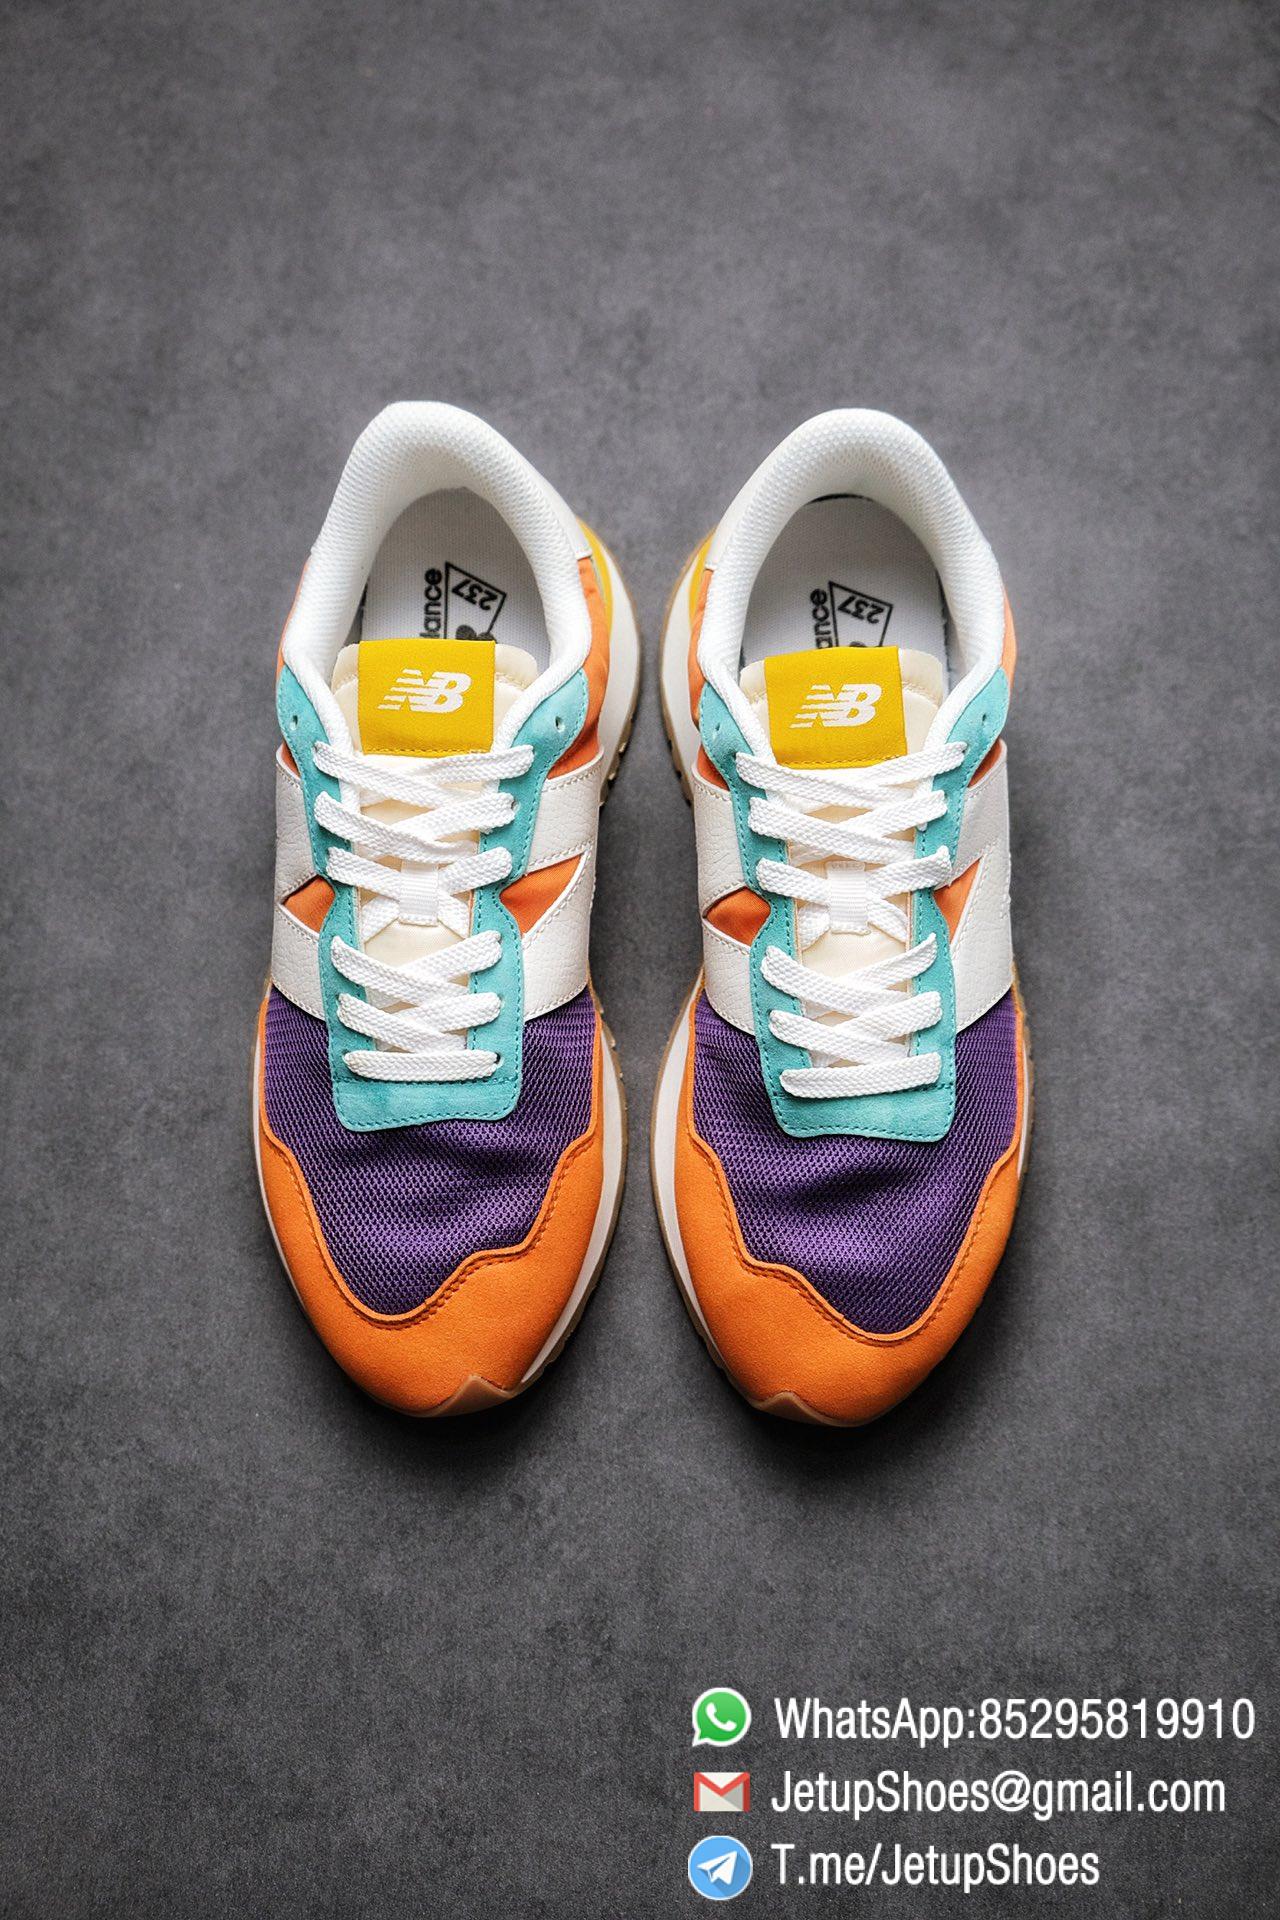 Best Replica New Balance 237 Yellow Blue Orange Suede Purple Mesh Stitching SKU MS237LB2 High Quality Fake Multi Color Running Shoes 02